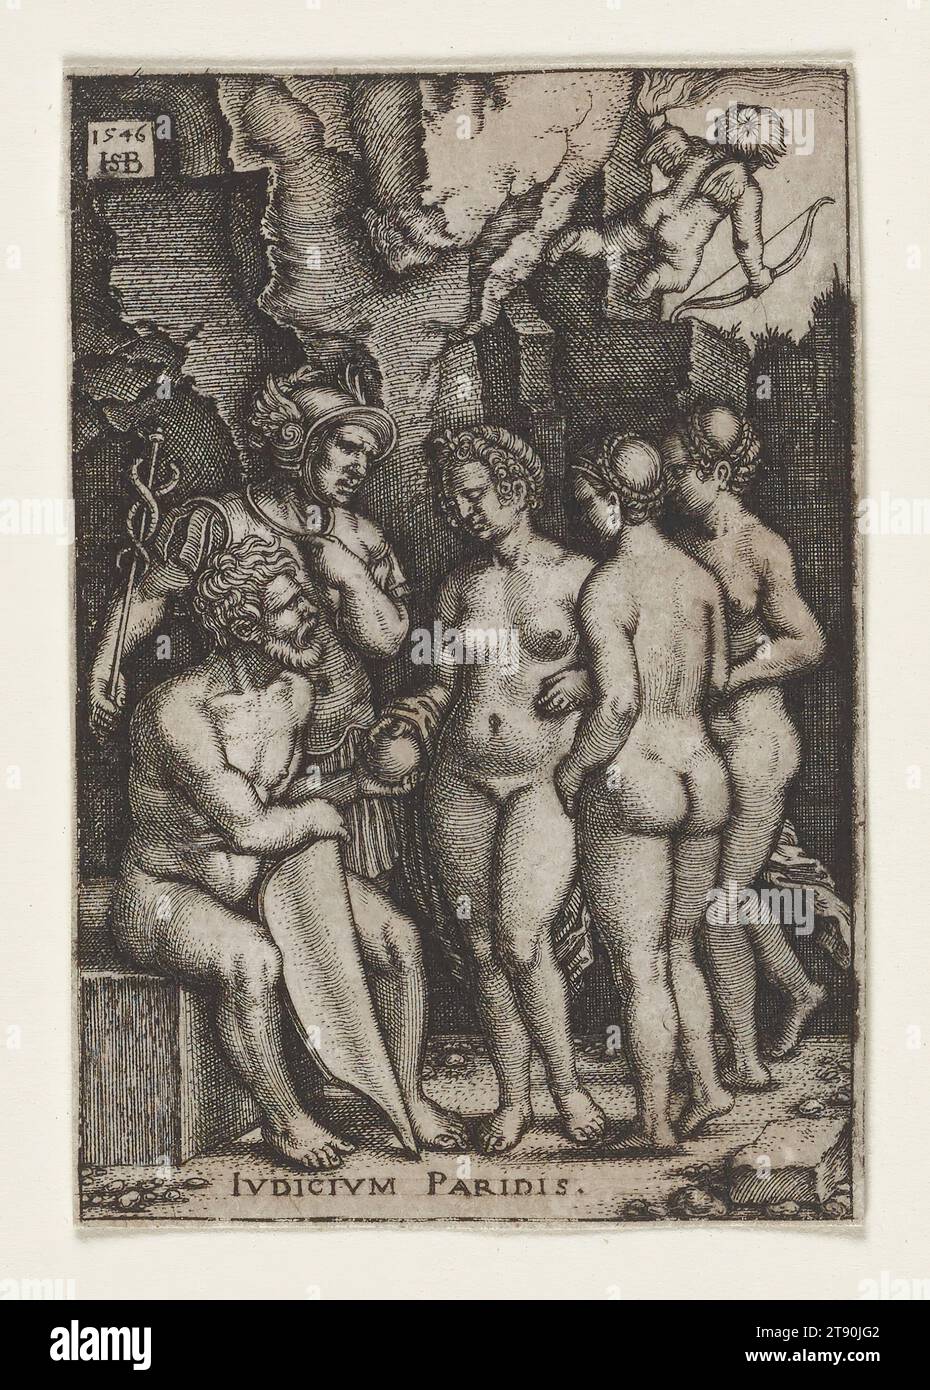 Judgement of Paris, 1546, Sebald Beham, German, 1500–1550, 2 3/4 × 1 7/8 in. (6.99 × 4.76 cm) (image, sheet), Engraving, 16th century, Writers in ancient Greece told various versions of the mythical story of the Judgment of Paris. Paris, a mortal, has been called upon to judge a beauty contest between three goddesses: which win the golden orb' Escorted by Hermes, the goddesses try to impress Paris, not just with their beauty but also with other incentives. Hera offered the lands of Europe and Asia. Athena offered military might and wisdom. Stock Photo